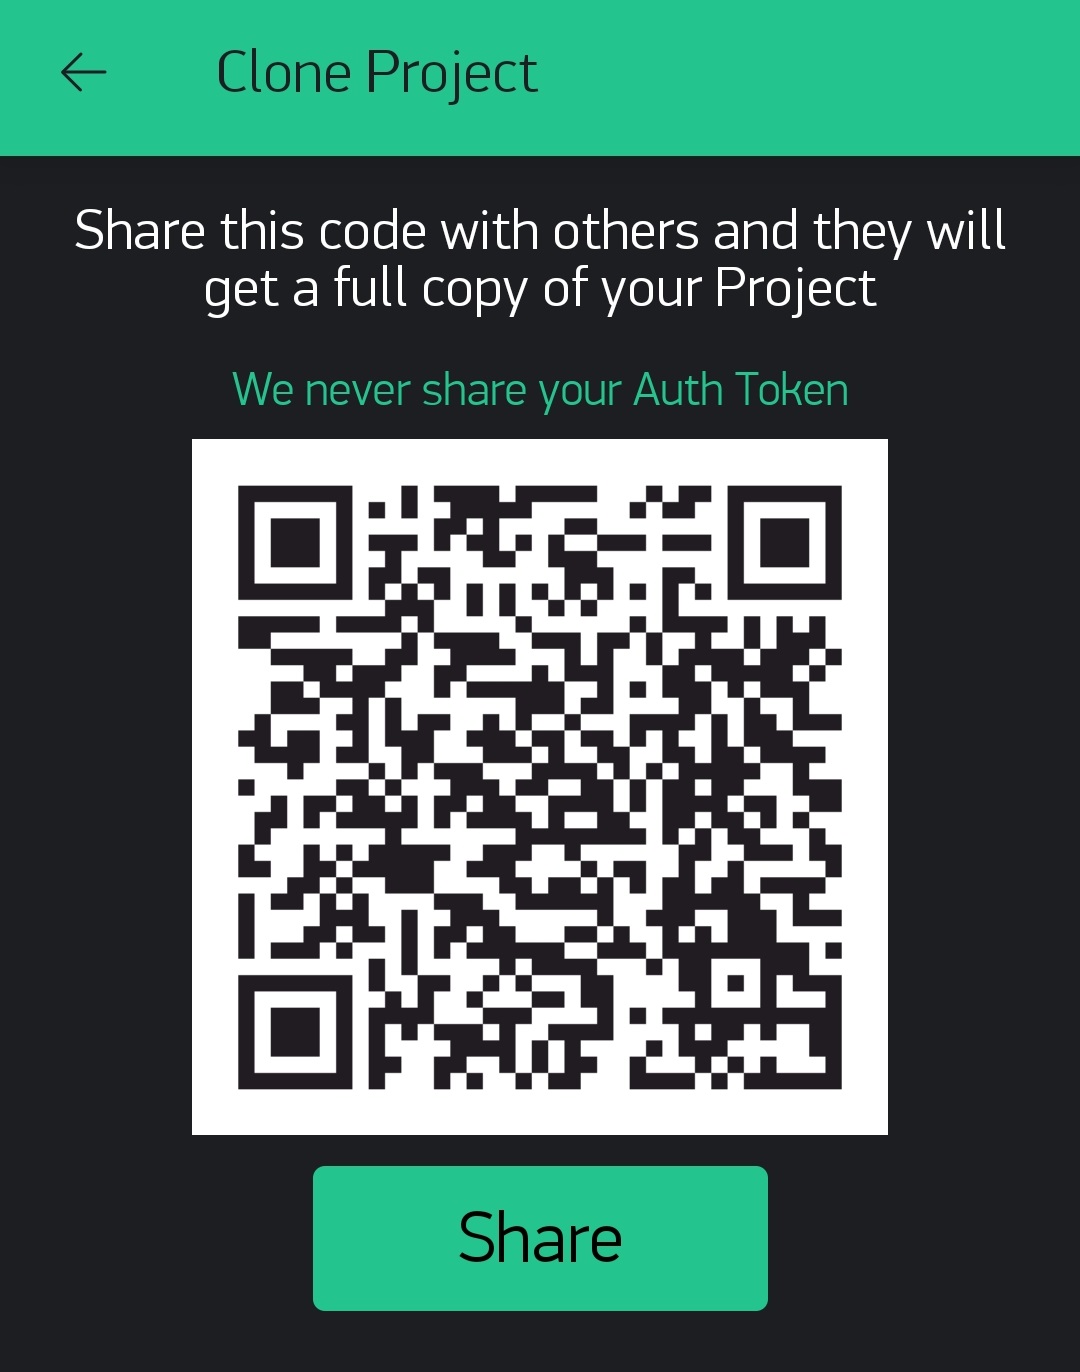 i made an ad for our discord server! lmk what you think! scan the QR code  or message me for the link to join if you want! : r/ProjectSekai